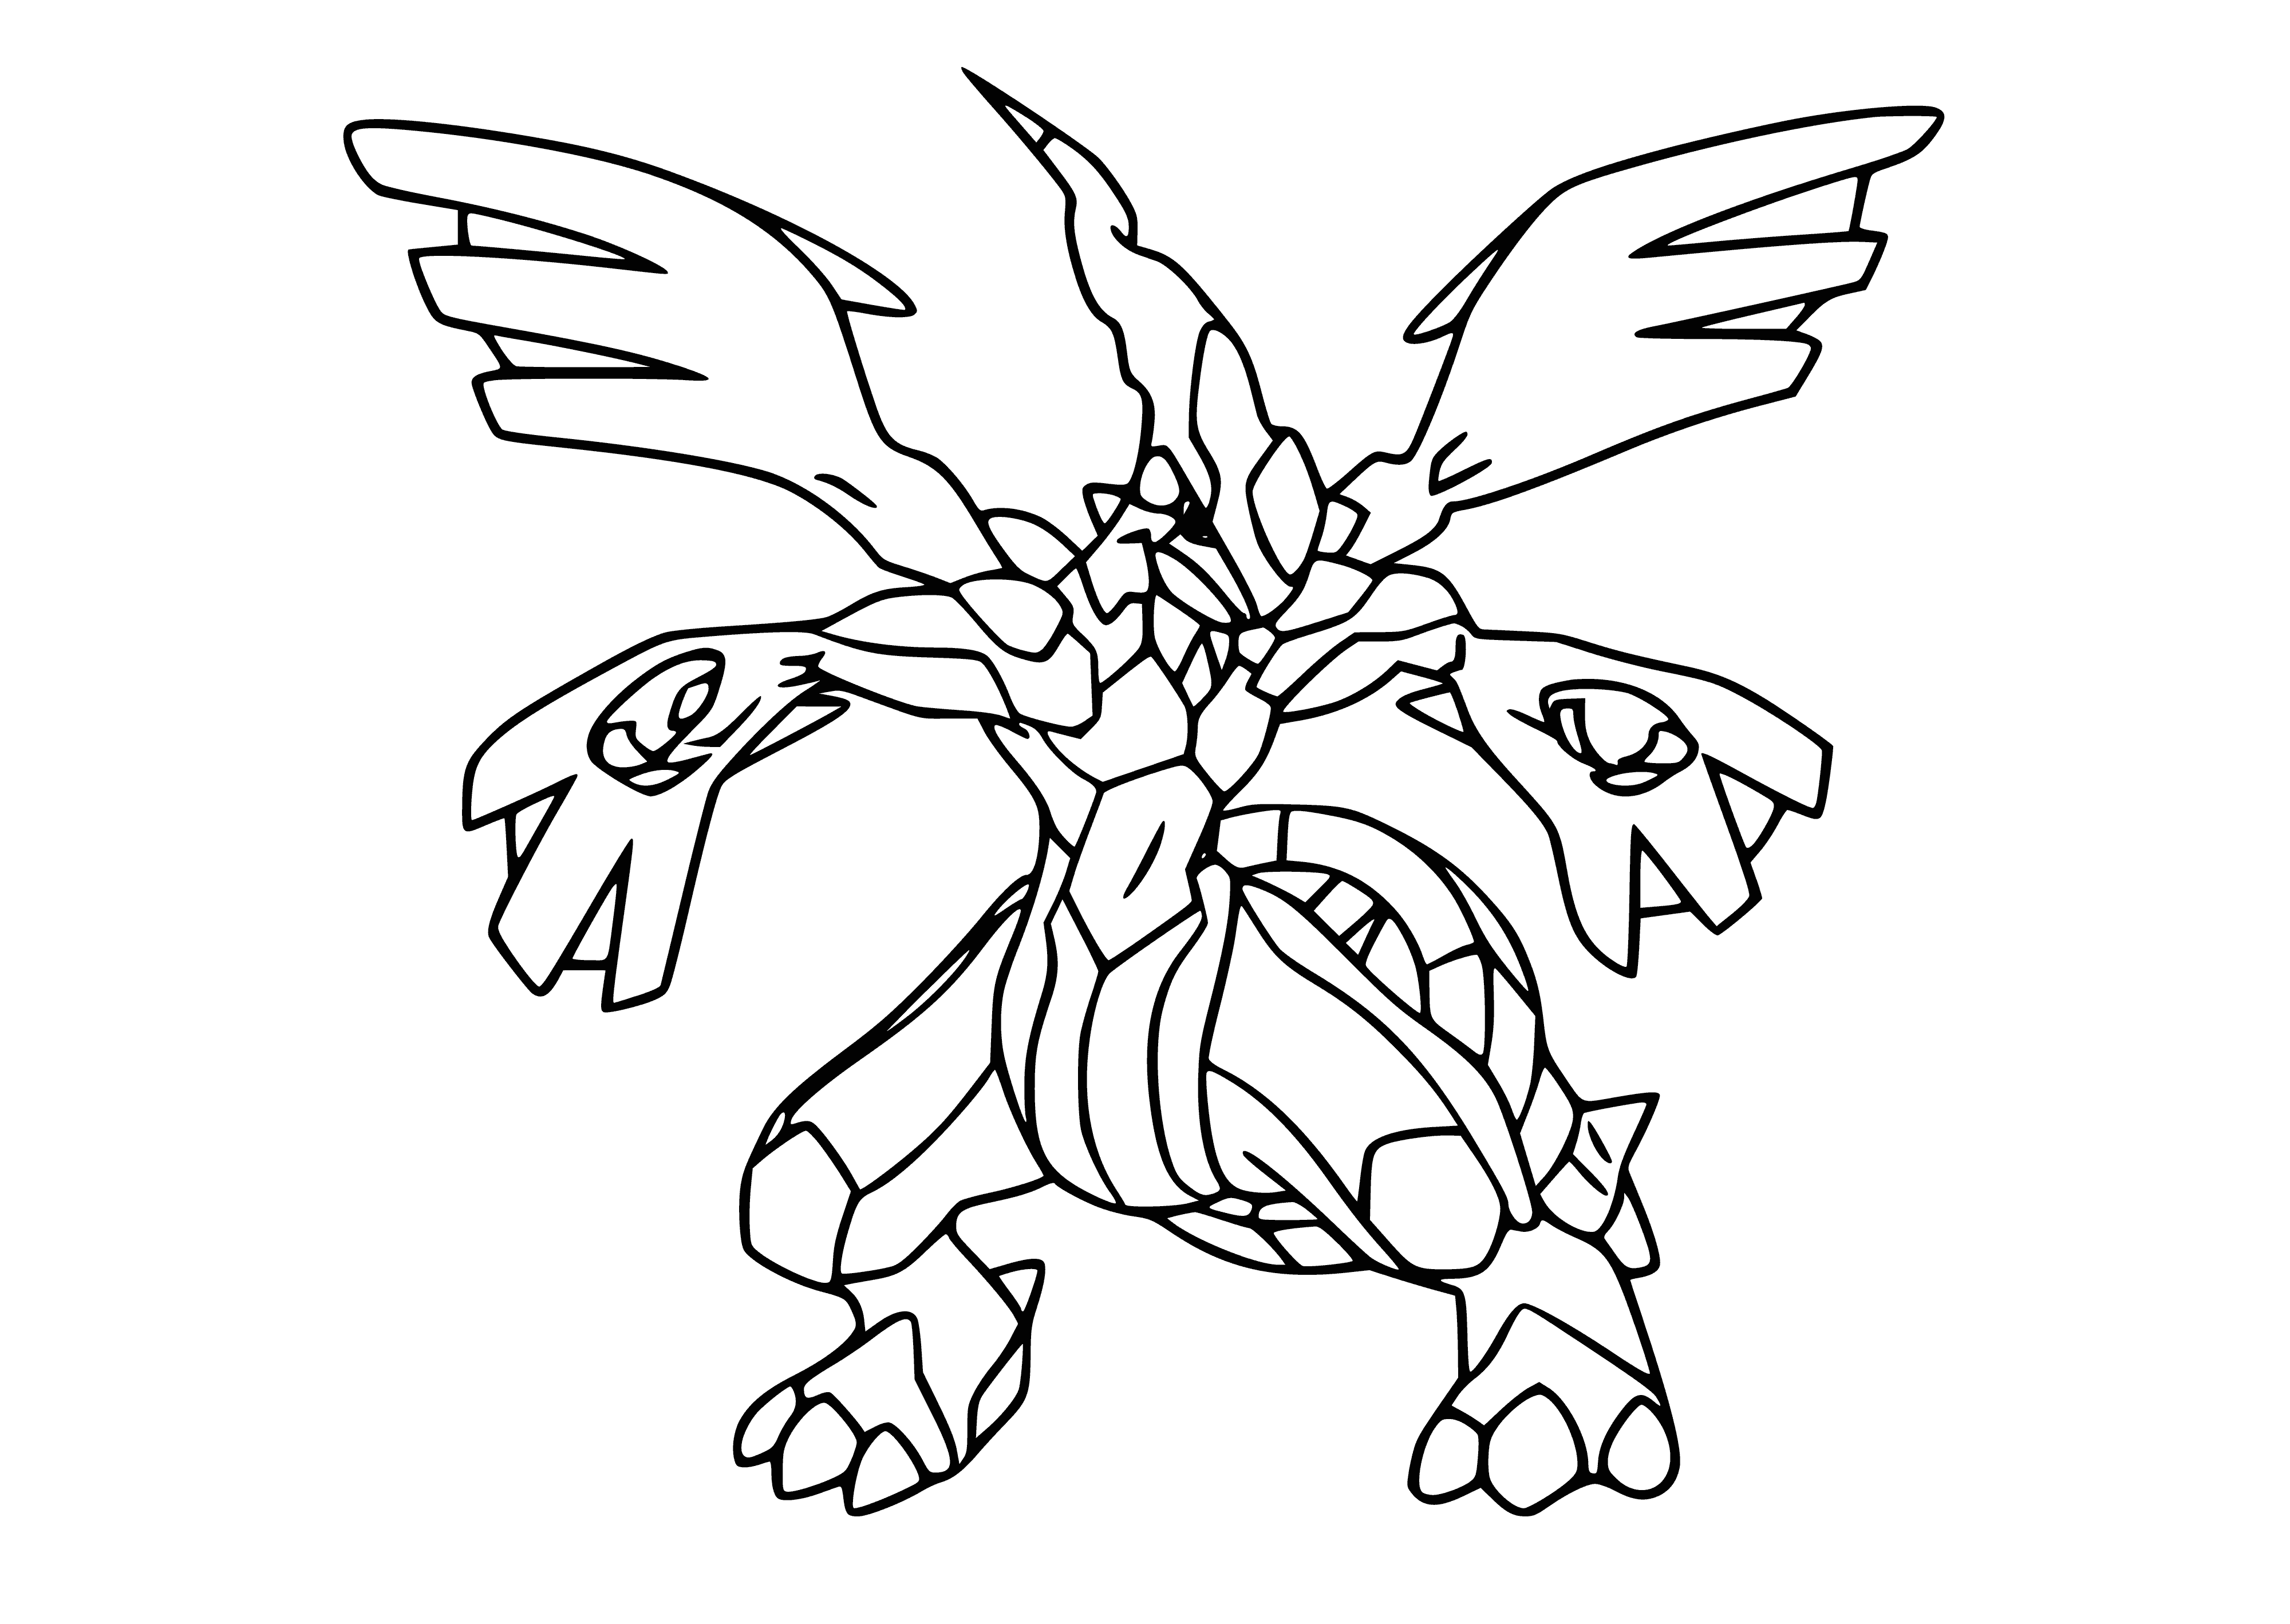 coloring page: Legendary Pokémon Zekrom destroys all it passes with electricity from its tail, earning a reputation with ranch constellations.